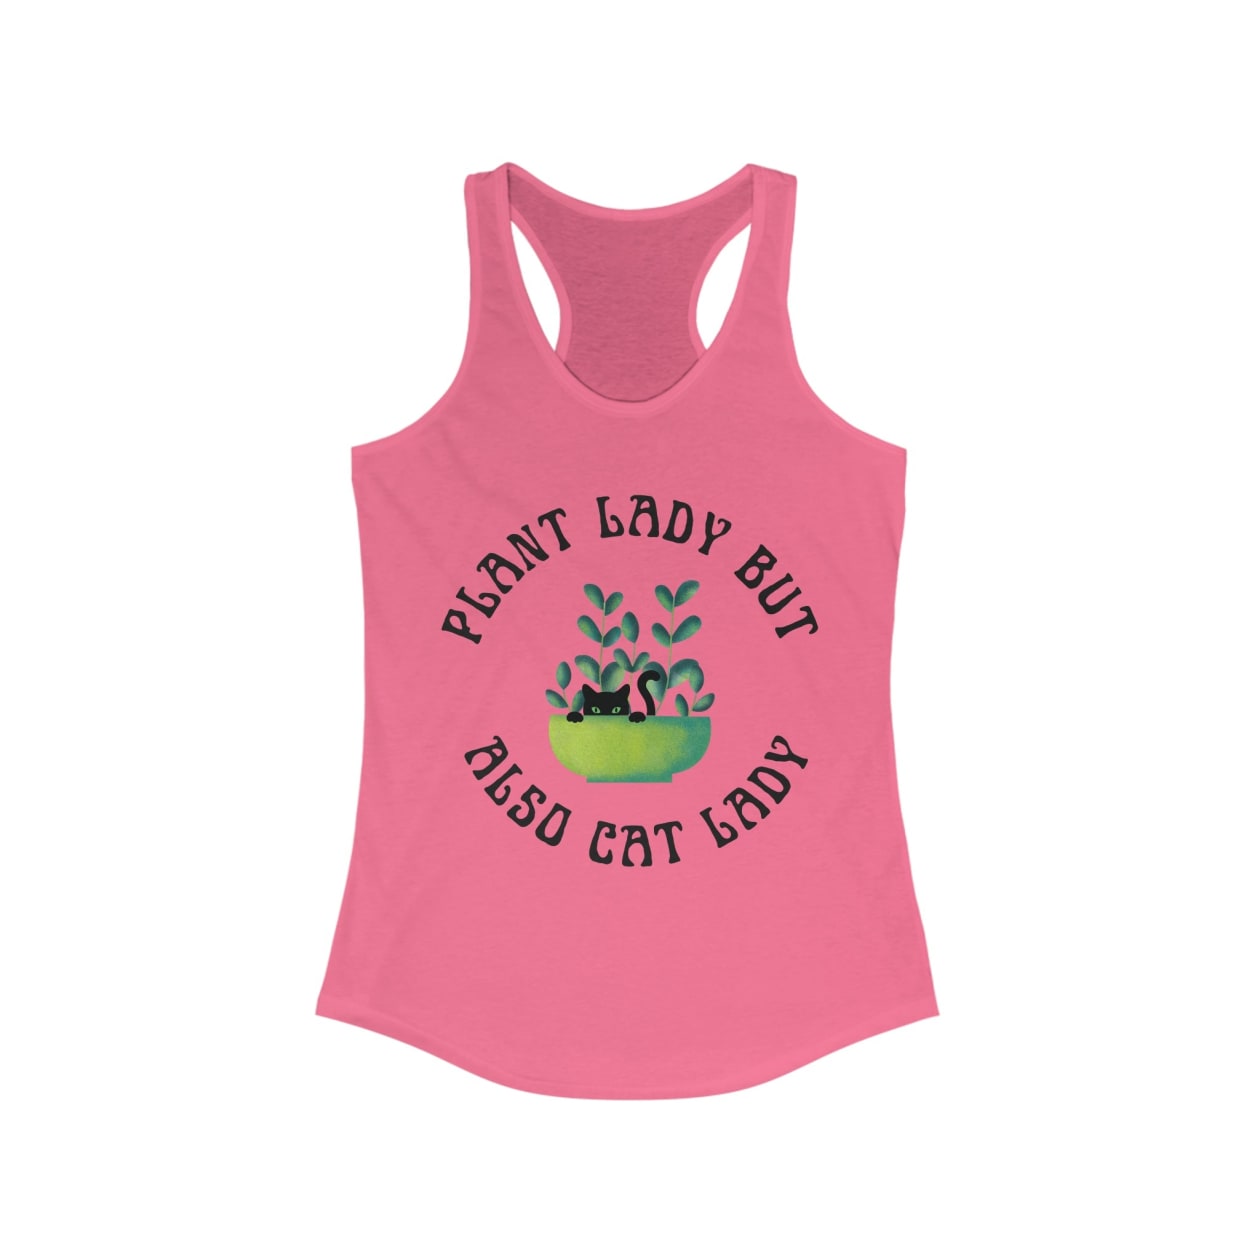 Plant Lady But Also Cat Lady Women's Ideal Racerback Tank - Color: Solid Hot Pink, Size: XS